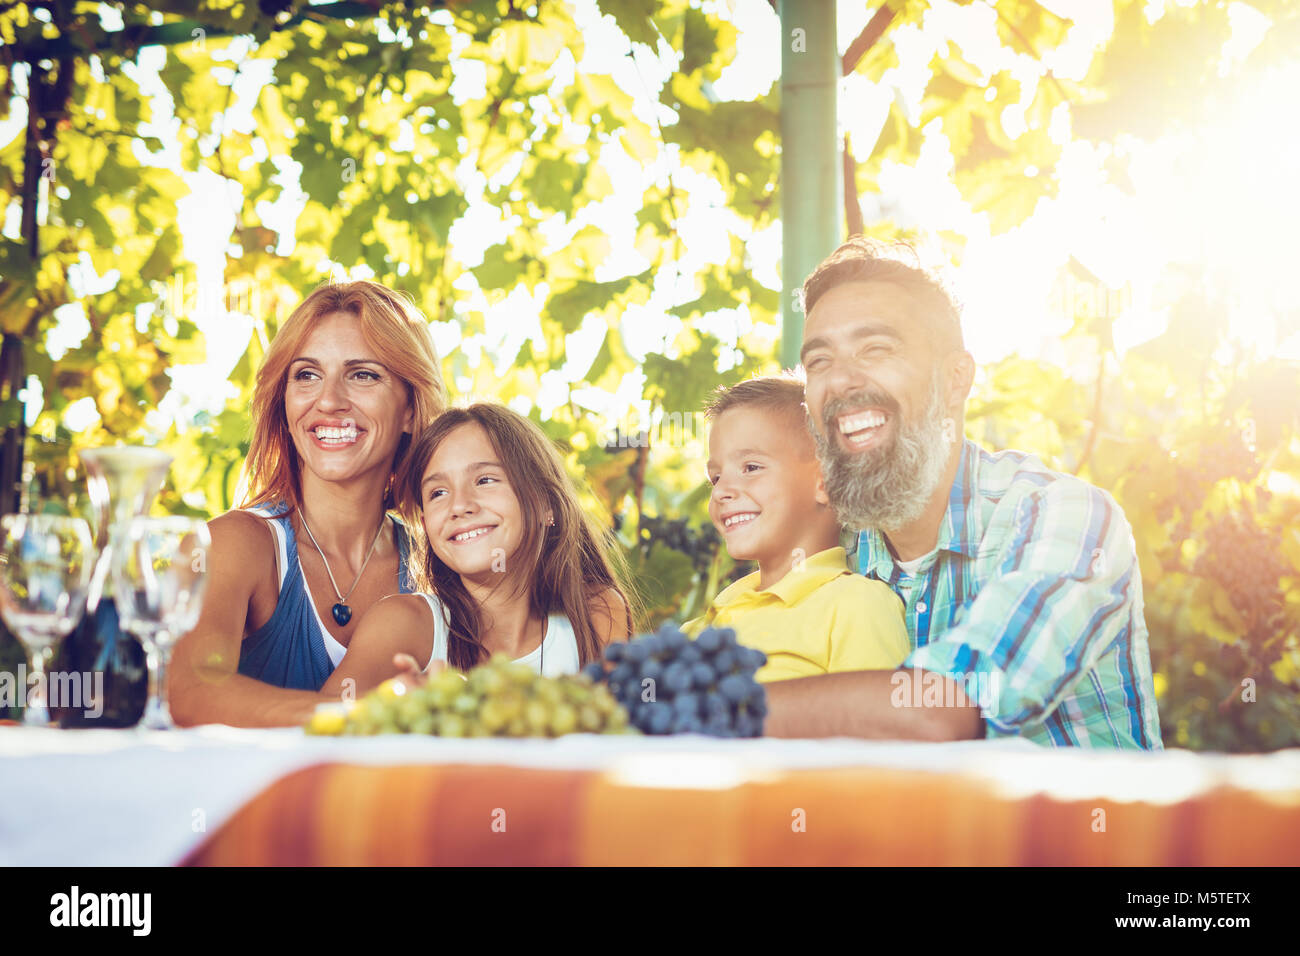 Beautiful young smiling family of four with dog having picnic at a vineyard. Stock Photo